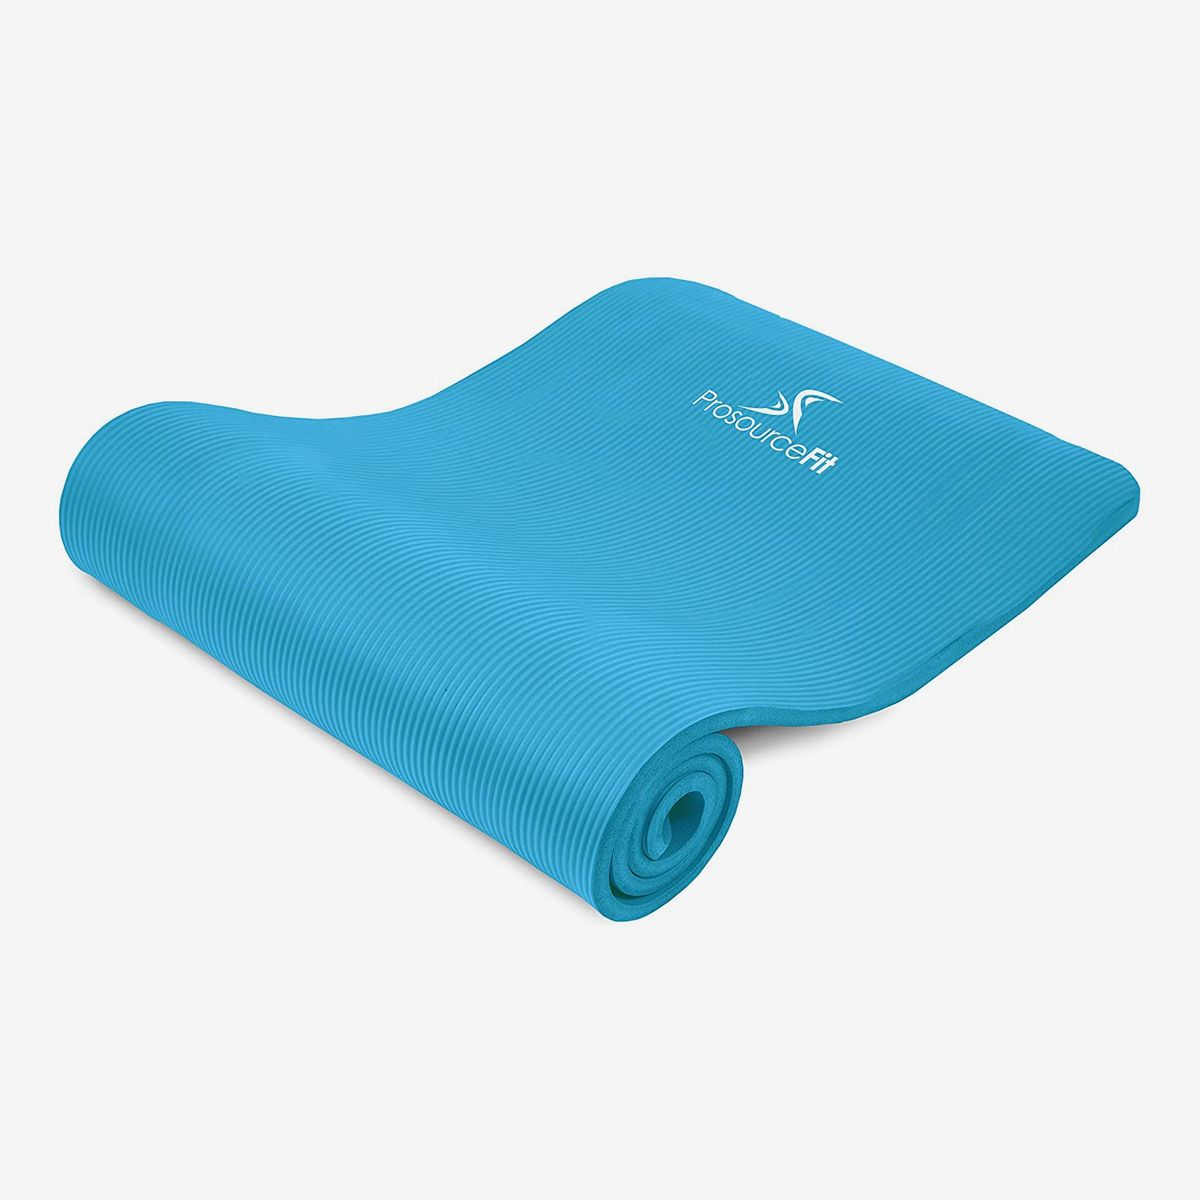 thickest yoga mat on the market